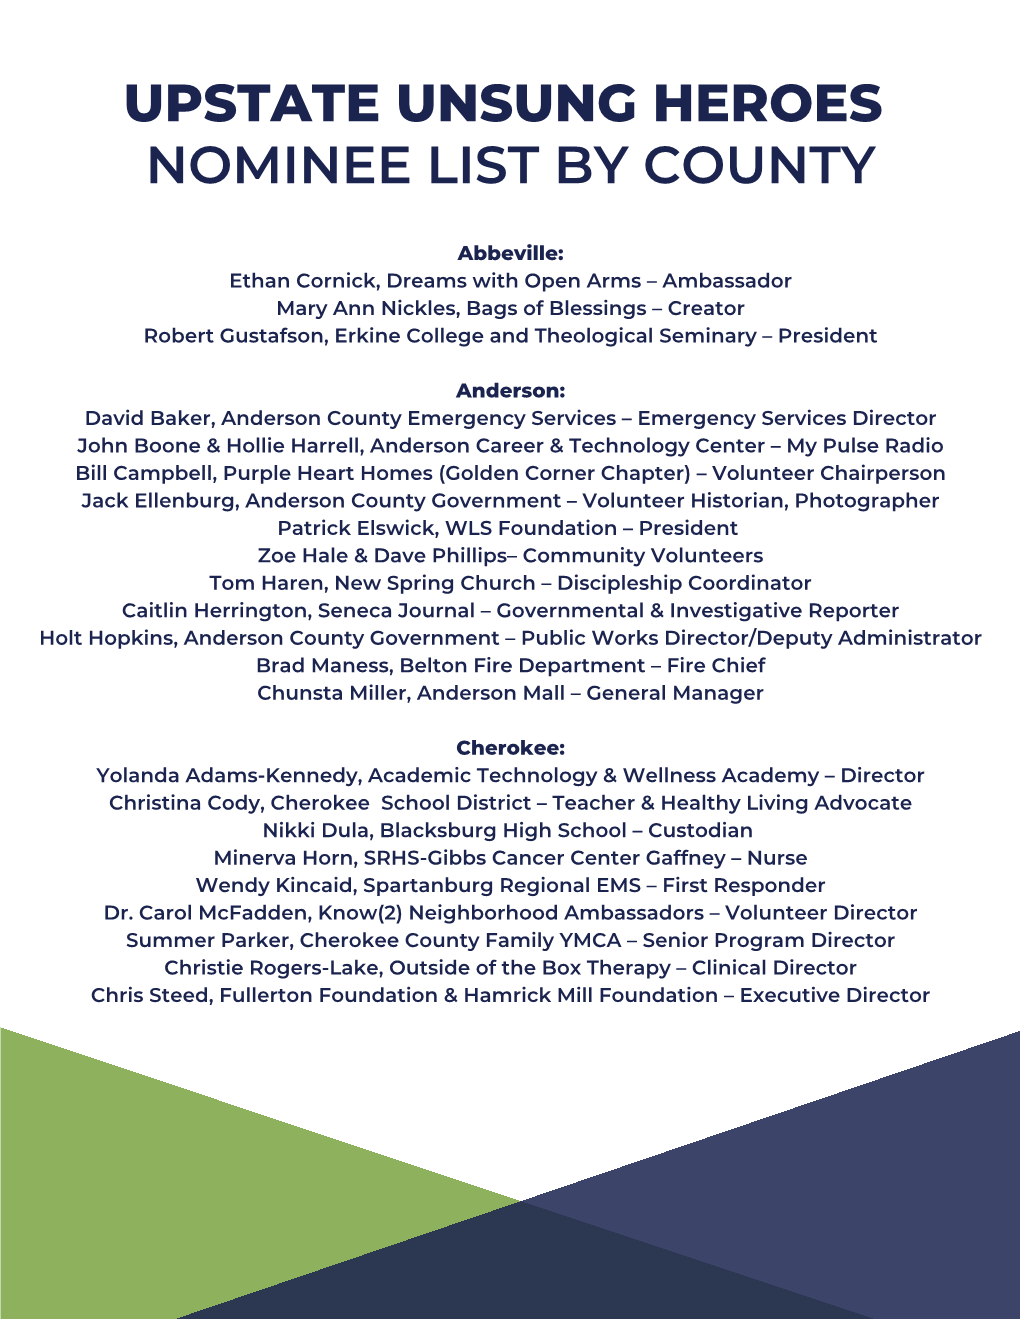 Upstate Unsung Heroes Nominee List by County